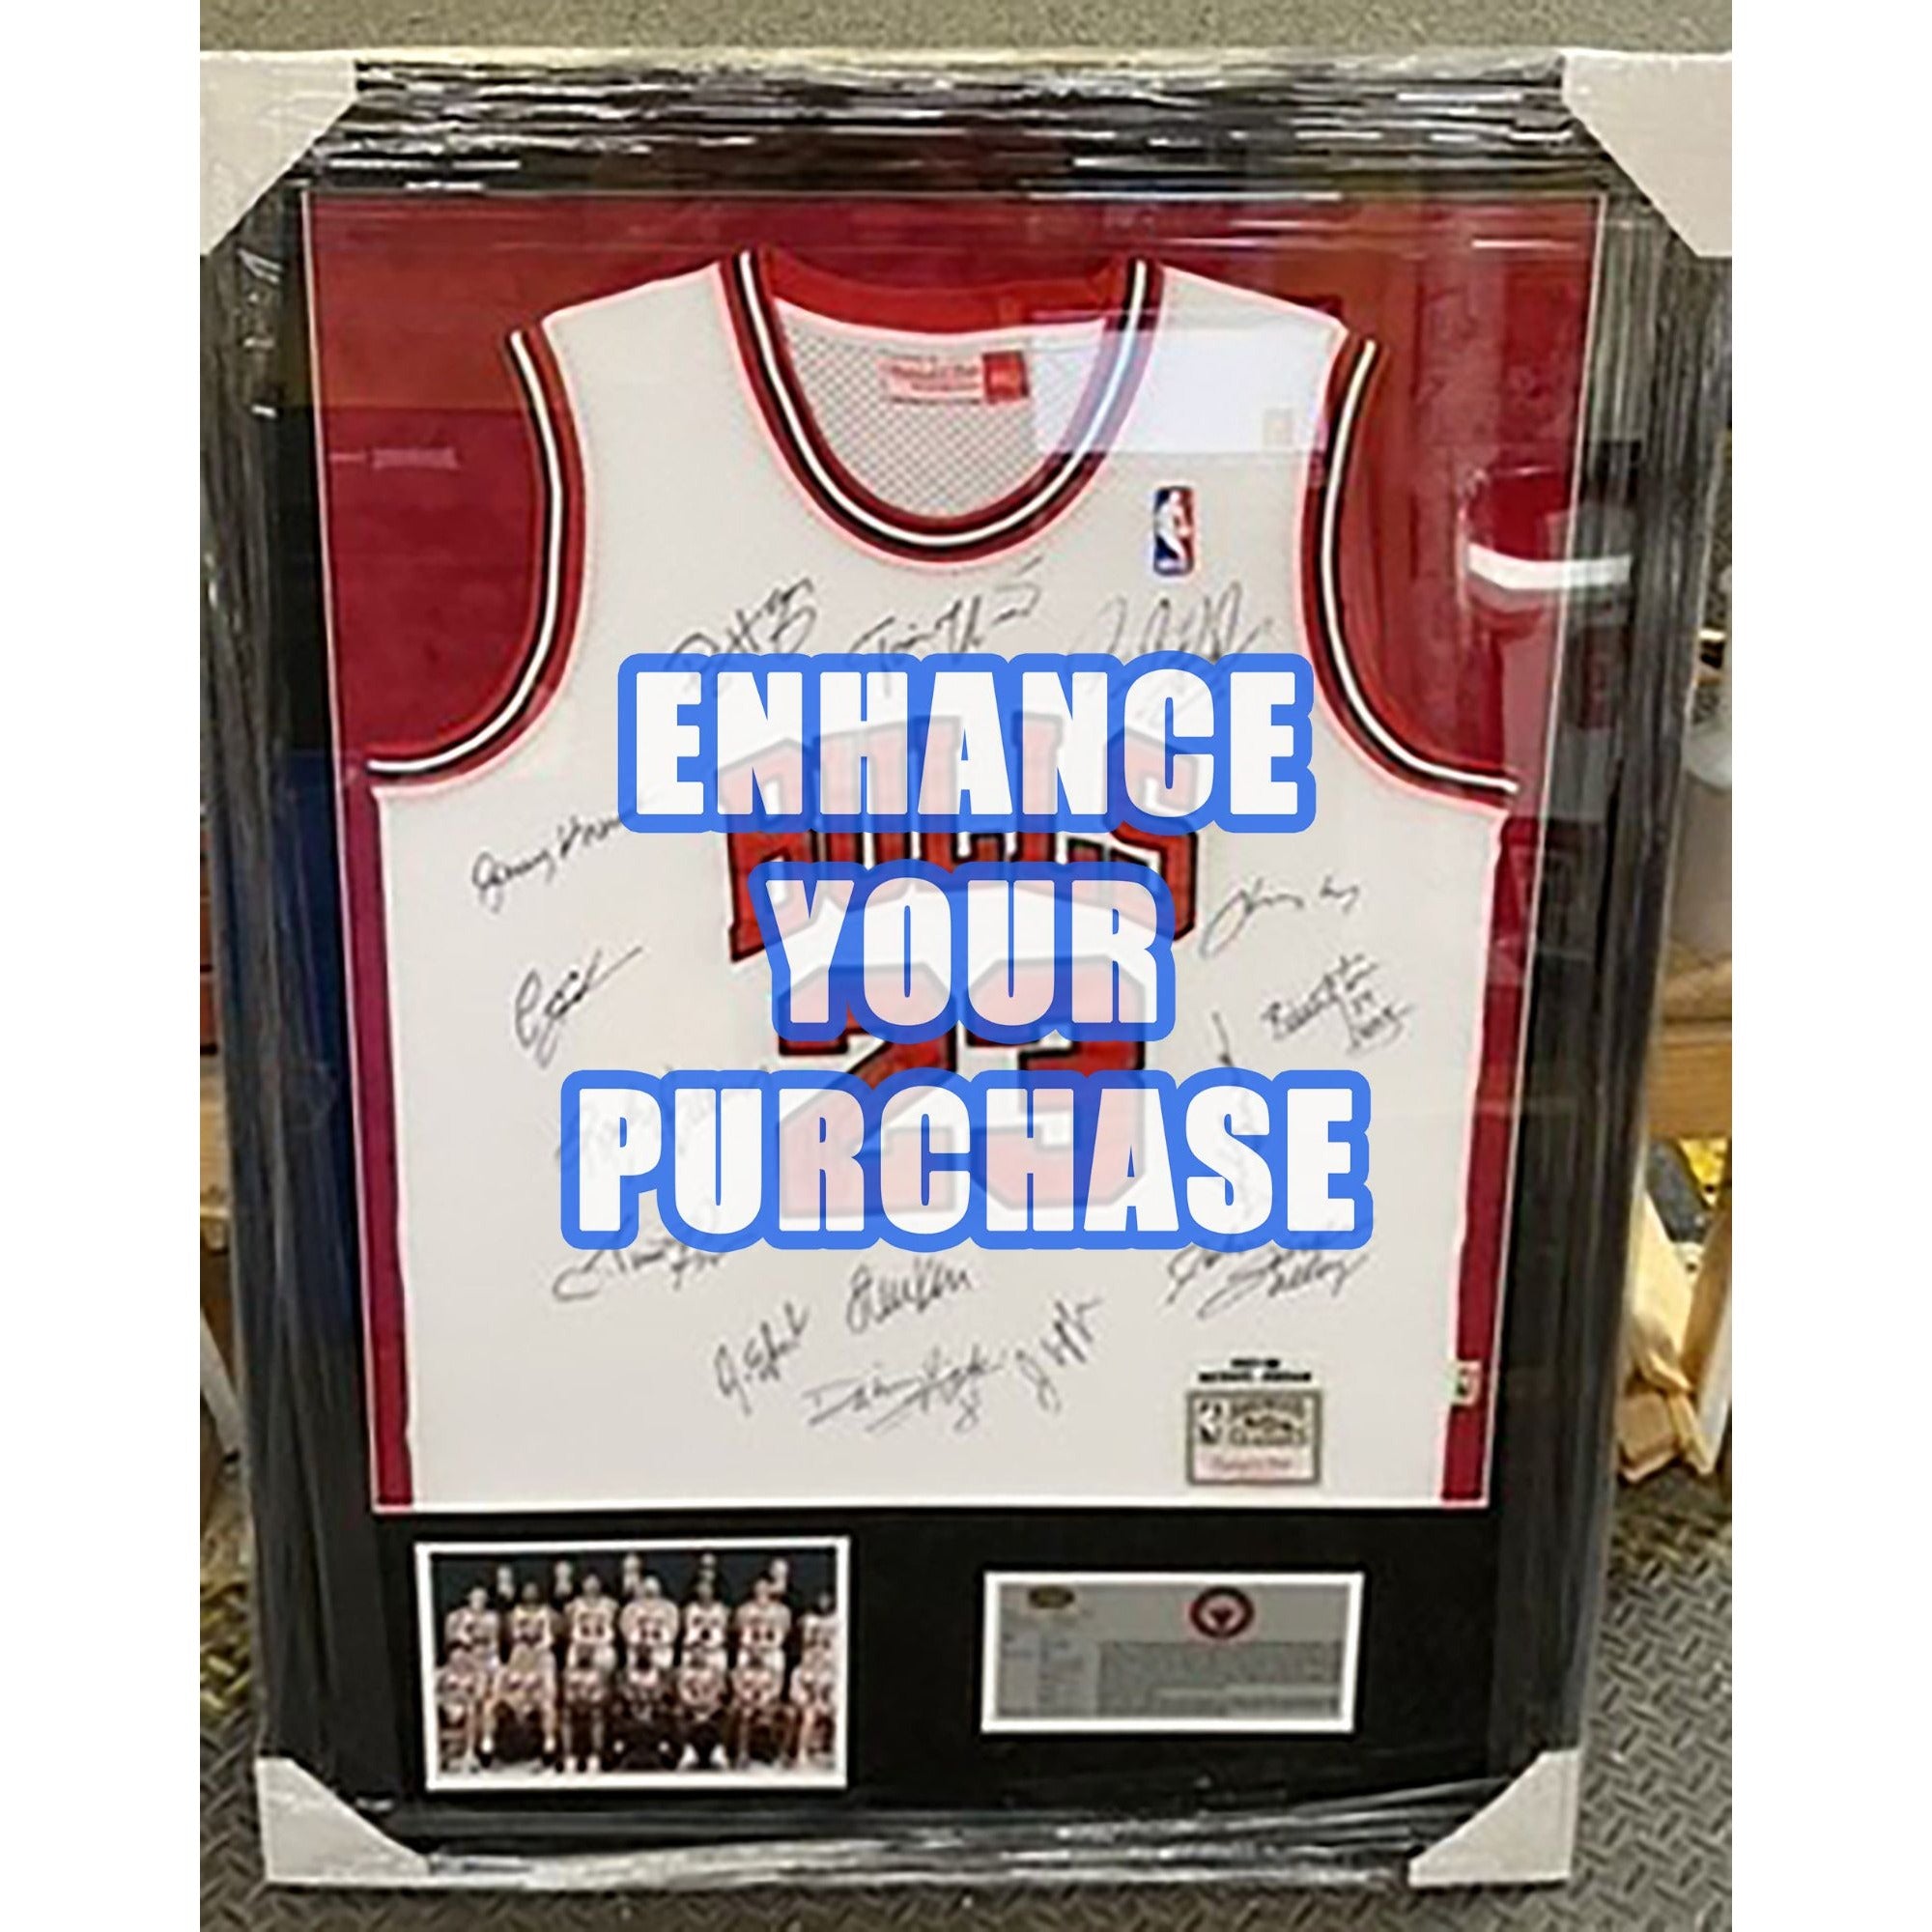 LeBron James Cleveland Cavaliers 2015-16 NBA champs team signed jersey with proof